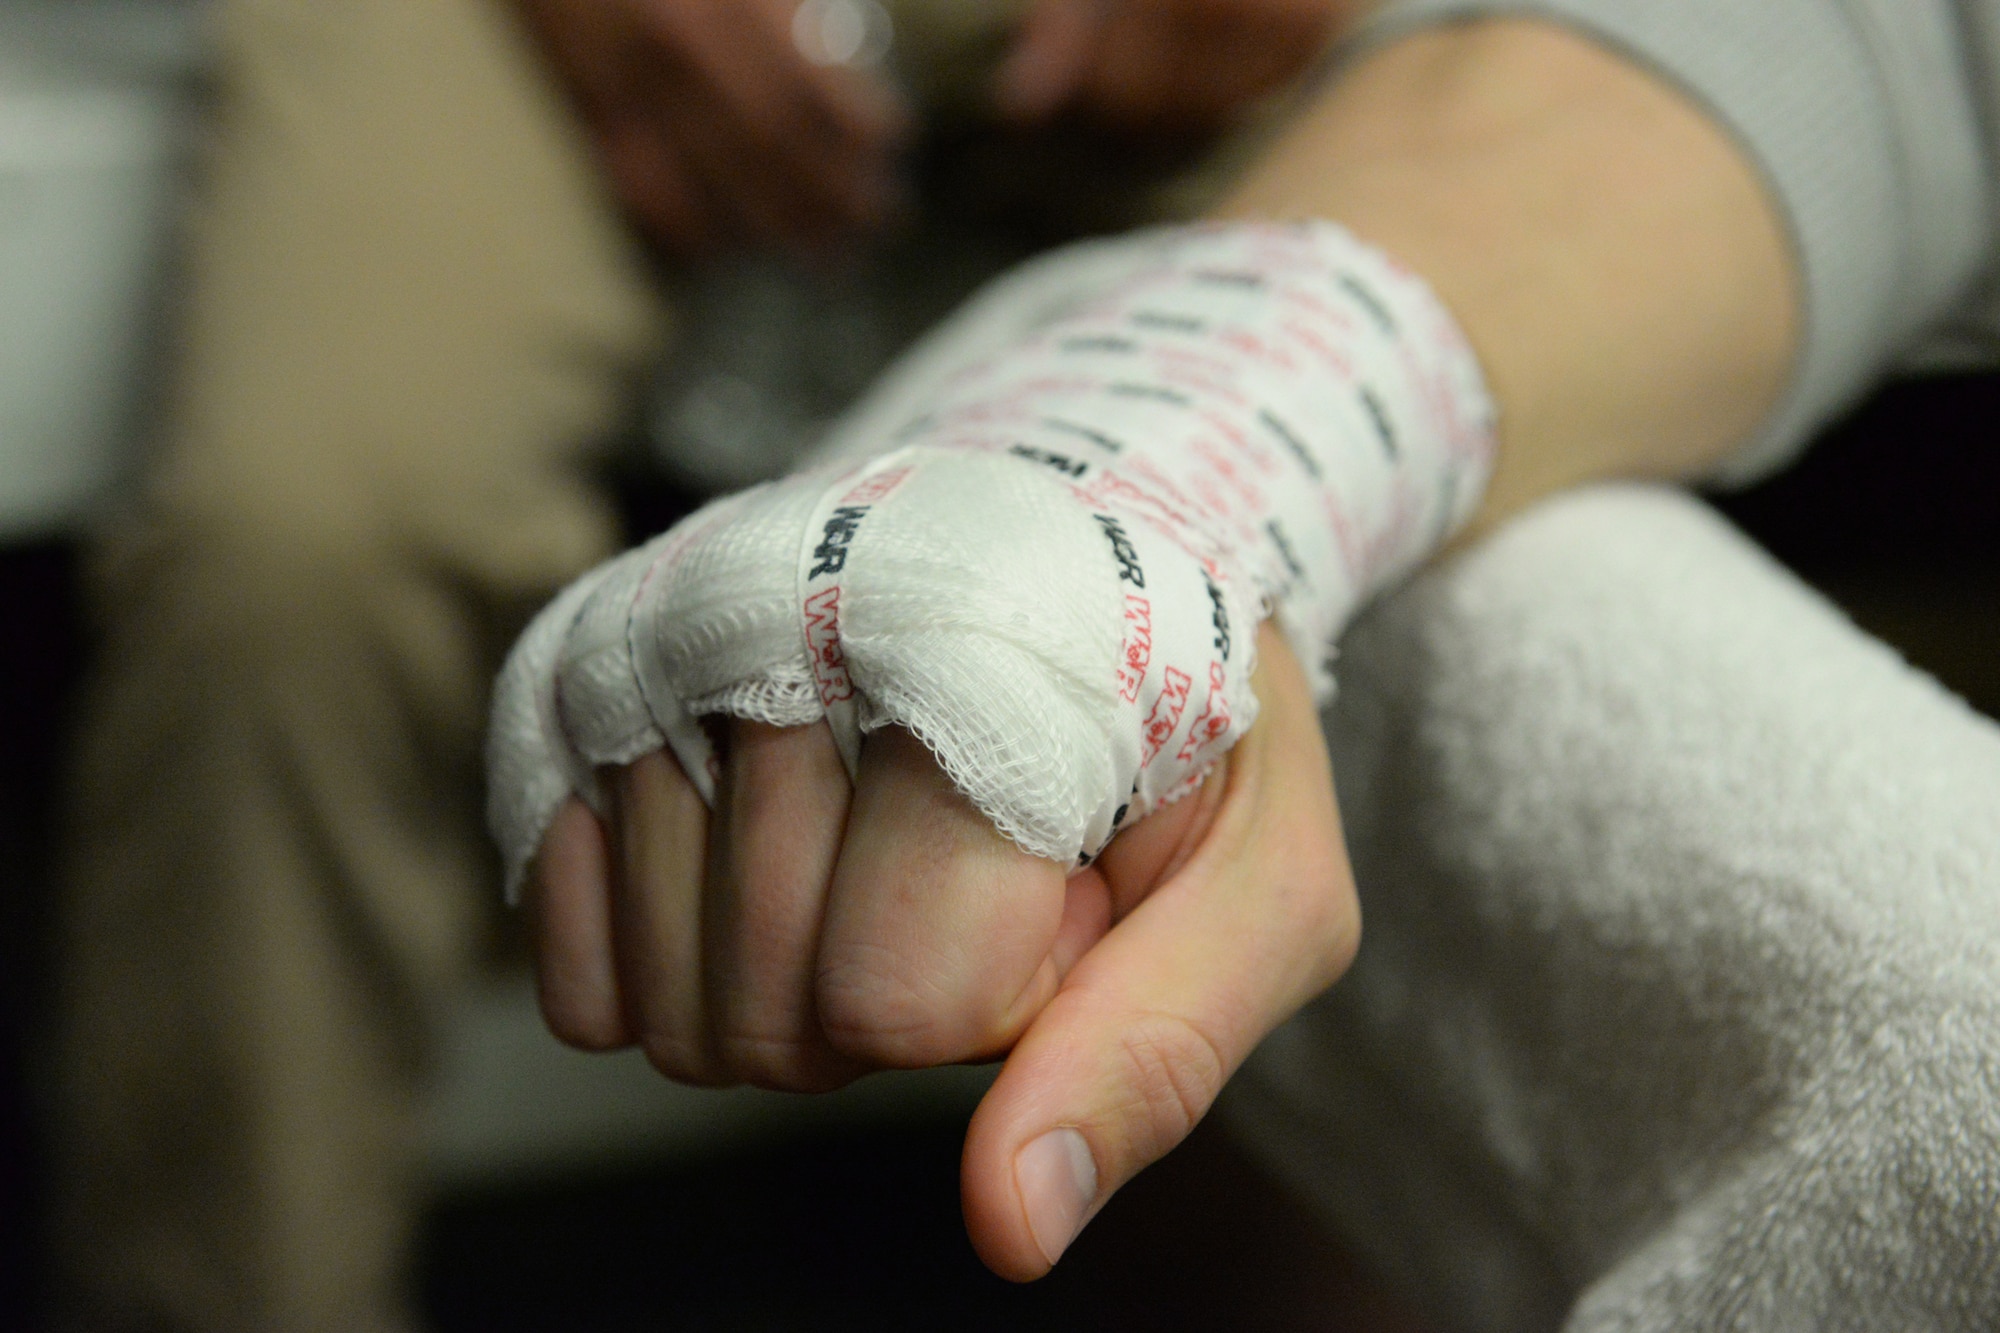 Senior Airman Michael Bullen, of the 119th Security Forces Squadron, makes a fist after his hand is wrapped prior to putting on his fighting gloves, as he prepares for a mixed martial arts fight May 16, 2015, the Freeman Arena, Detroit Lakes, Minnesota. The security forces Airman uses mixed martial arts training and fighting to enhance his fitness and skills to be better prepared in his career field and to be better prepared for potential threats on duty.  (U.S. Air National Guard photo by Senior Master Sgt. David H. Lipp/Released)